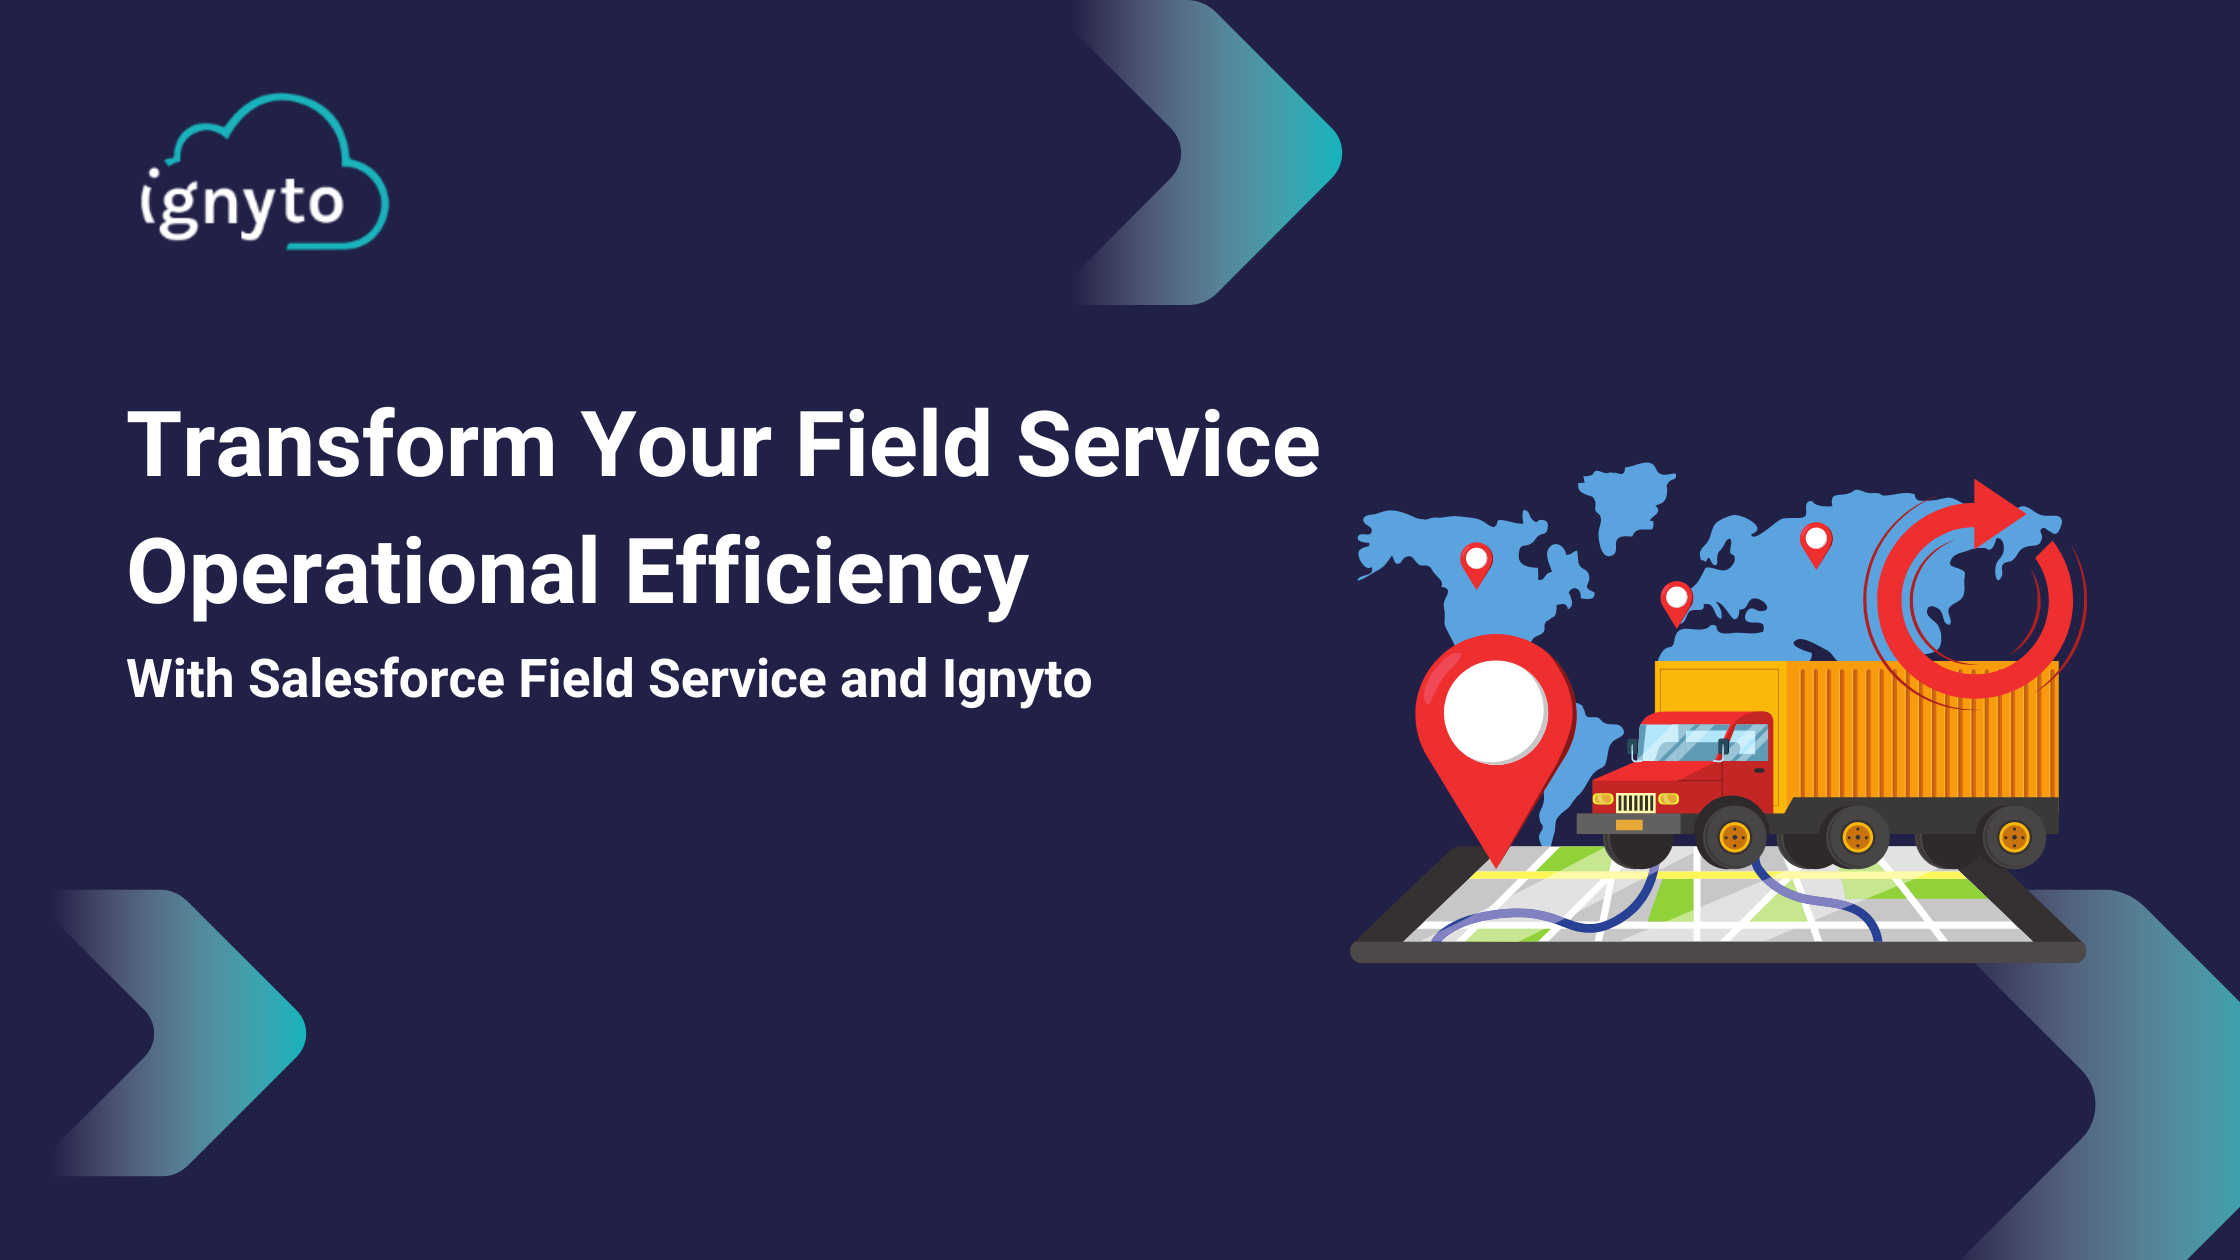 Field Service with Ignyto